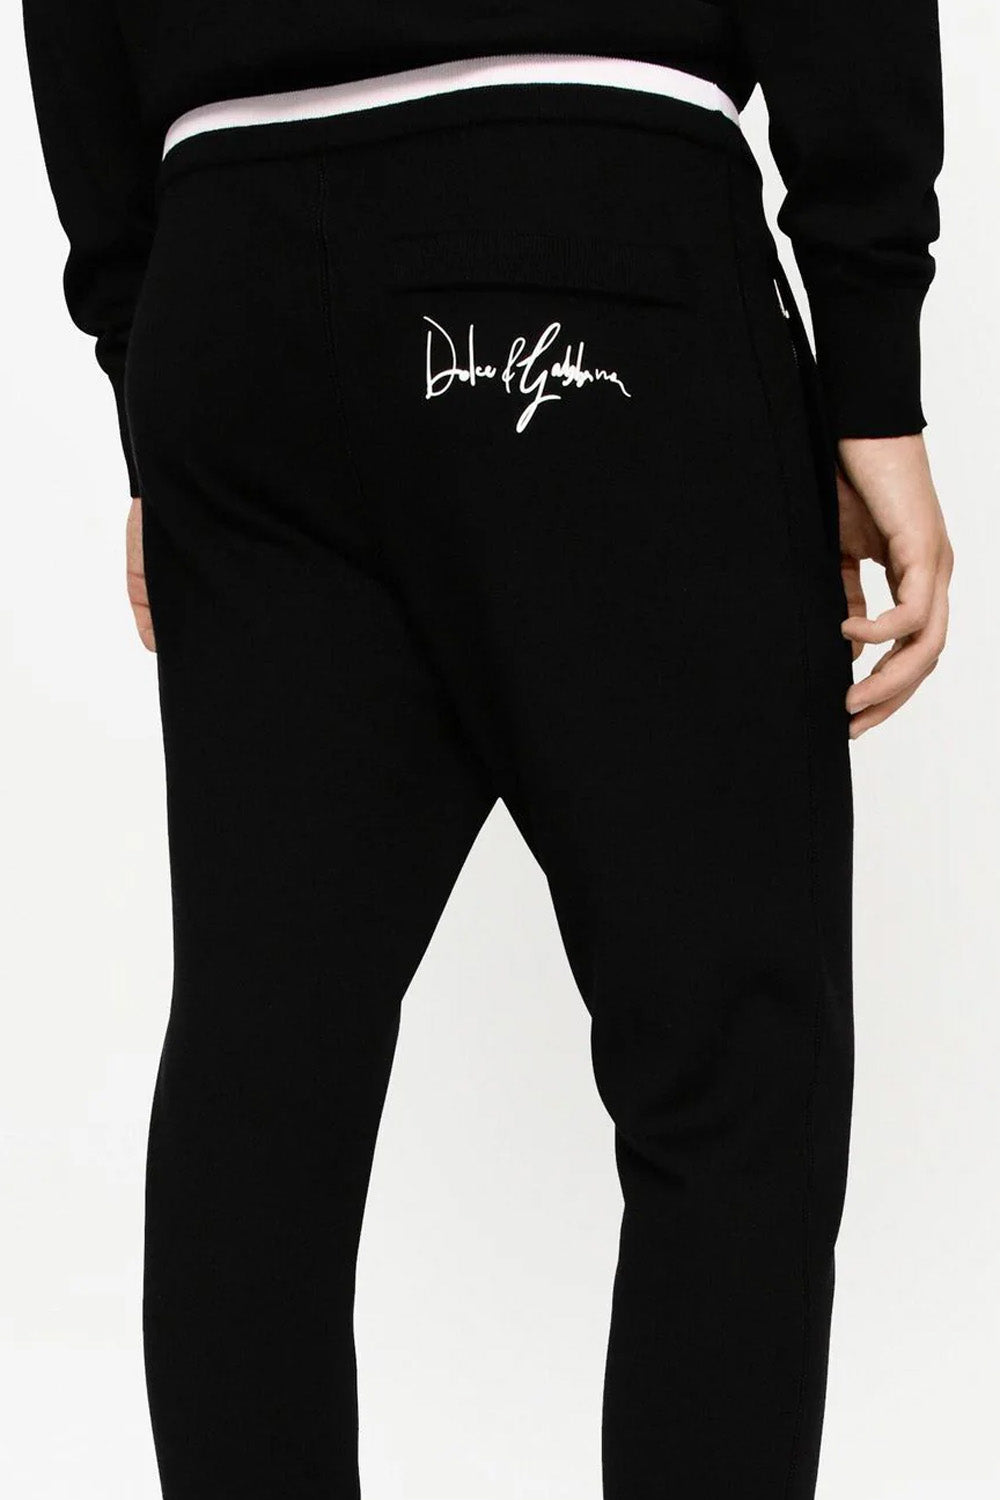 Dolce & Gabbana logo-embroidered track pants